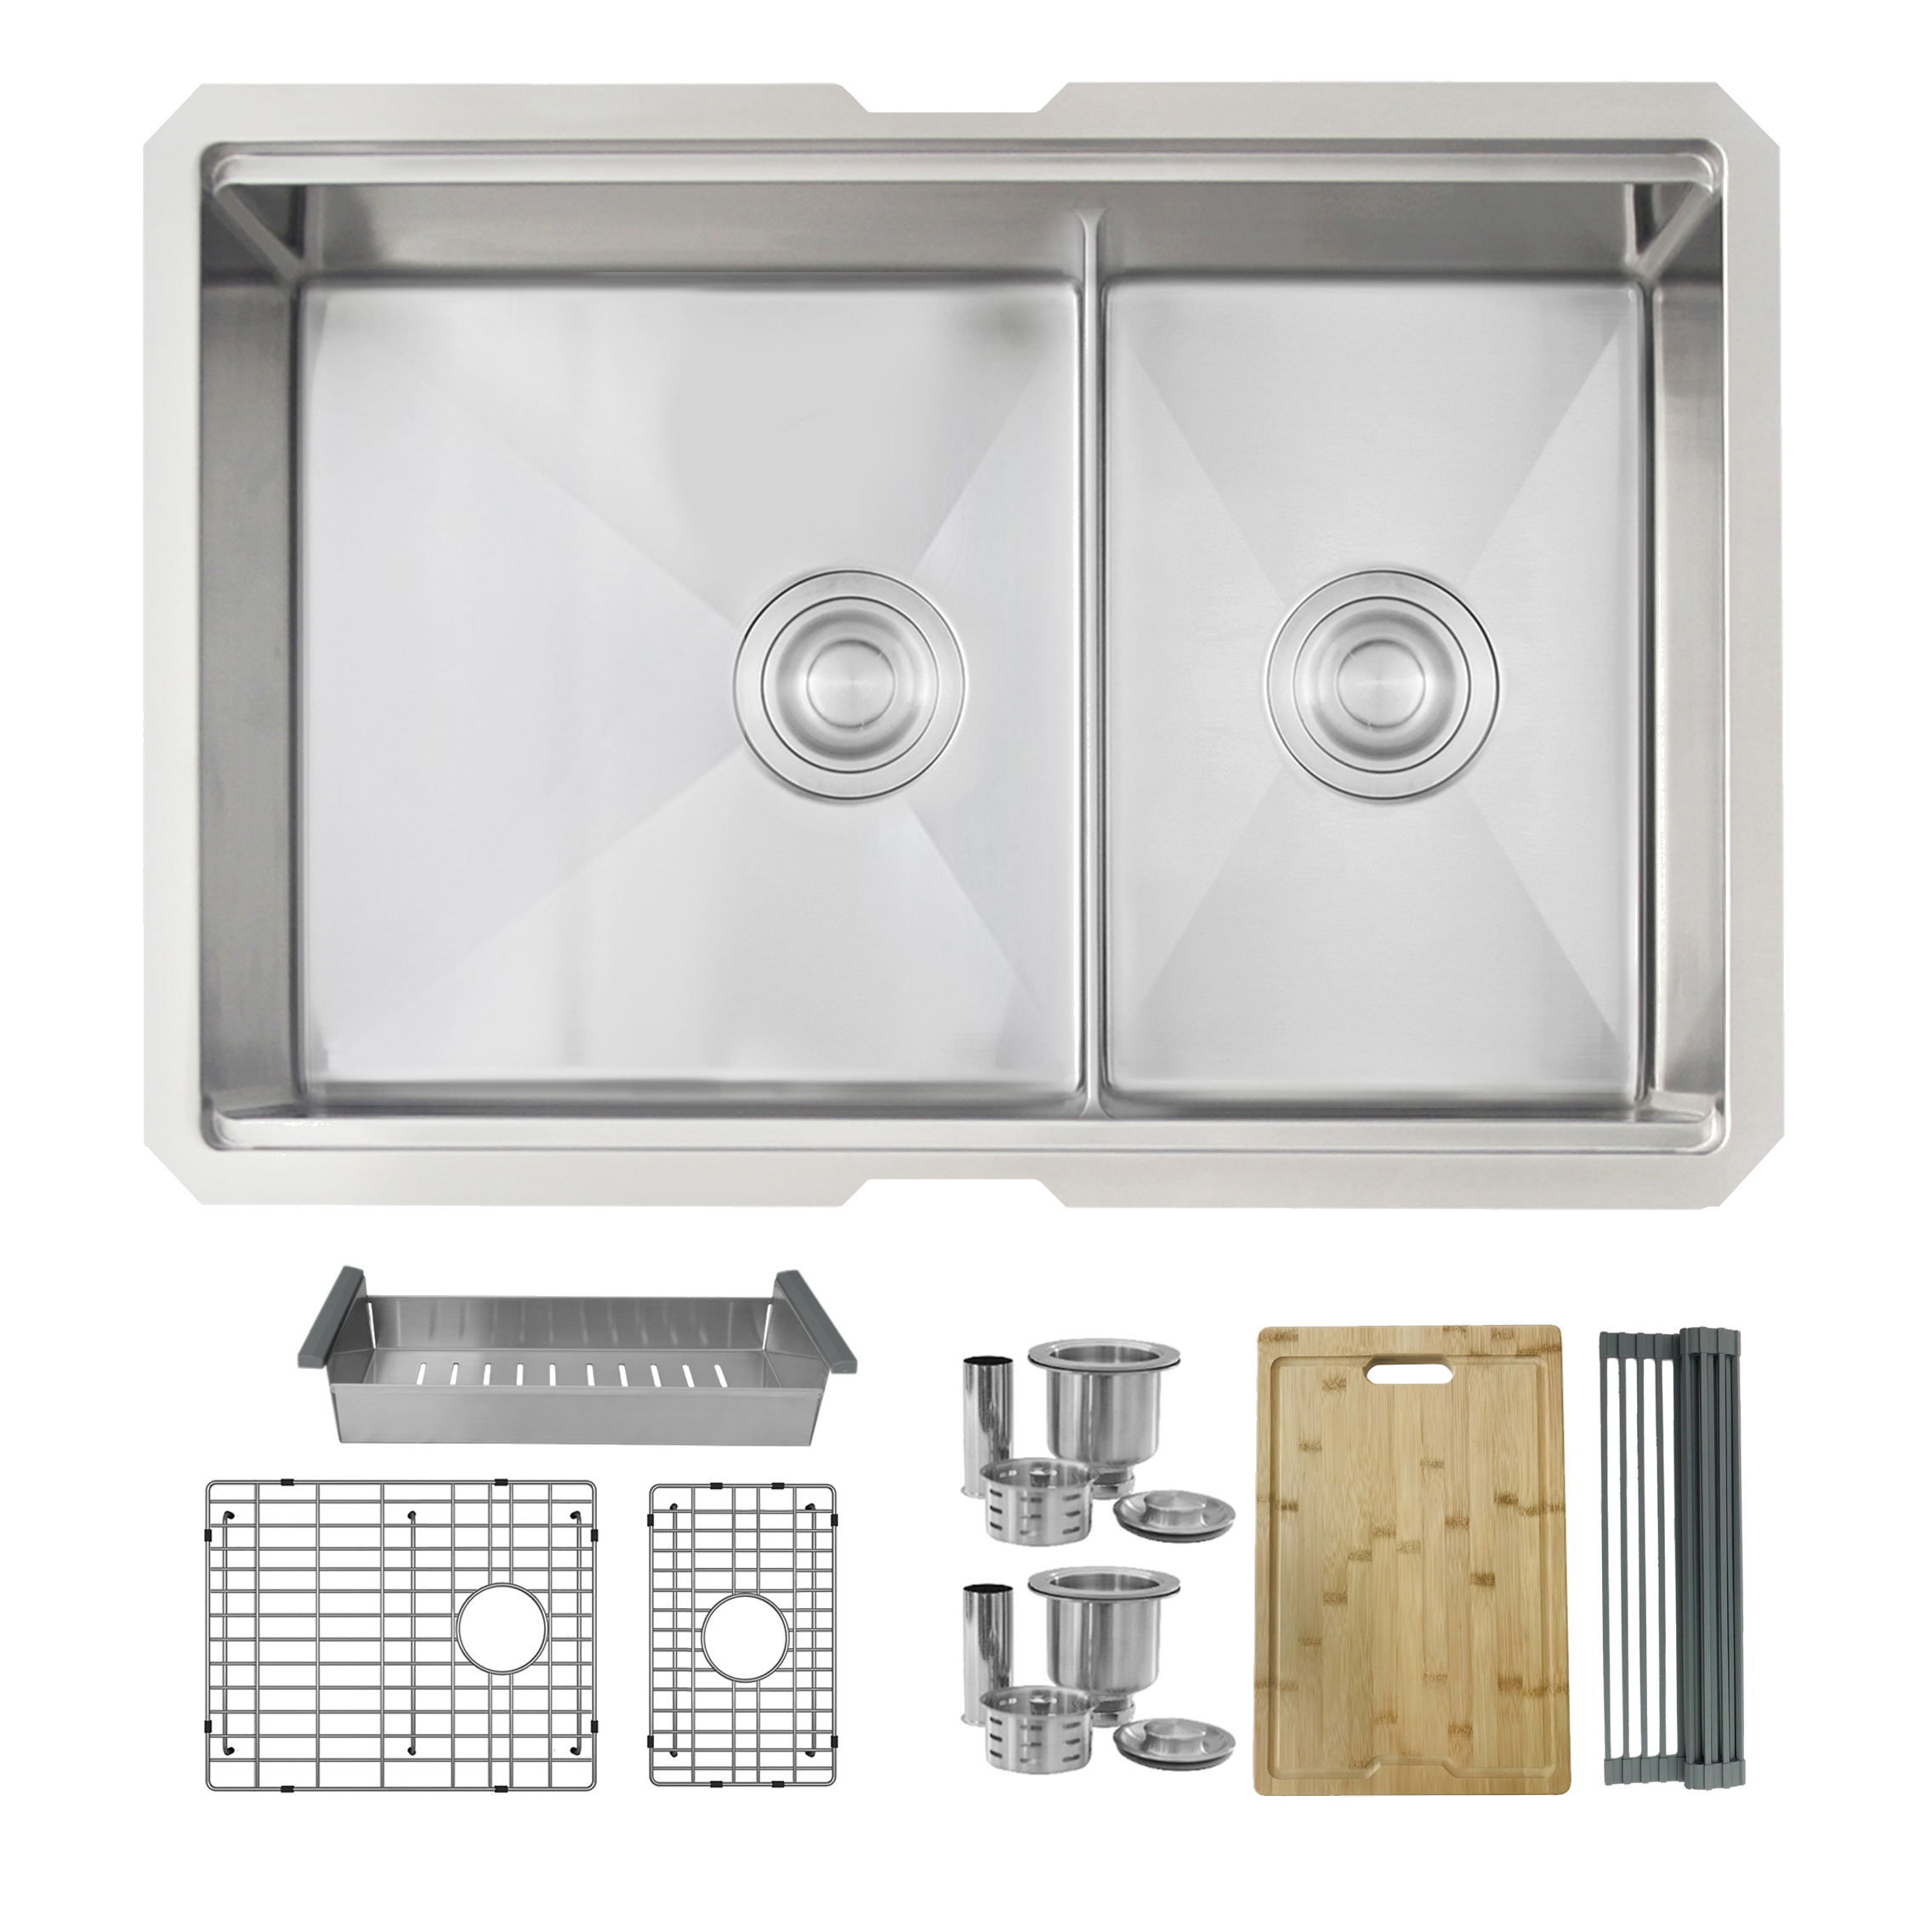 STYLISH 28 inch Workstation 60/40 Double Bowl Undermount Kitchen Sink with Built in Accessories